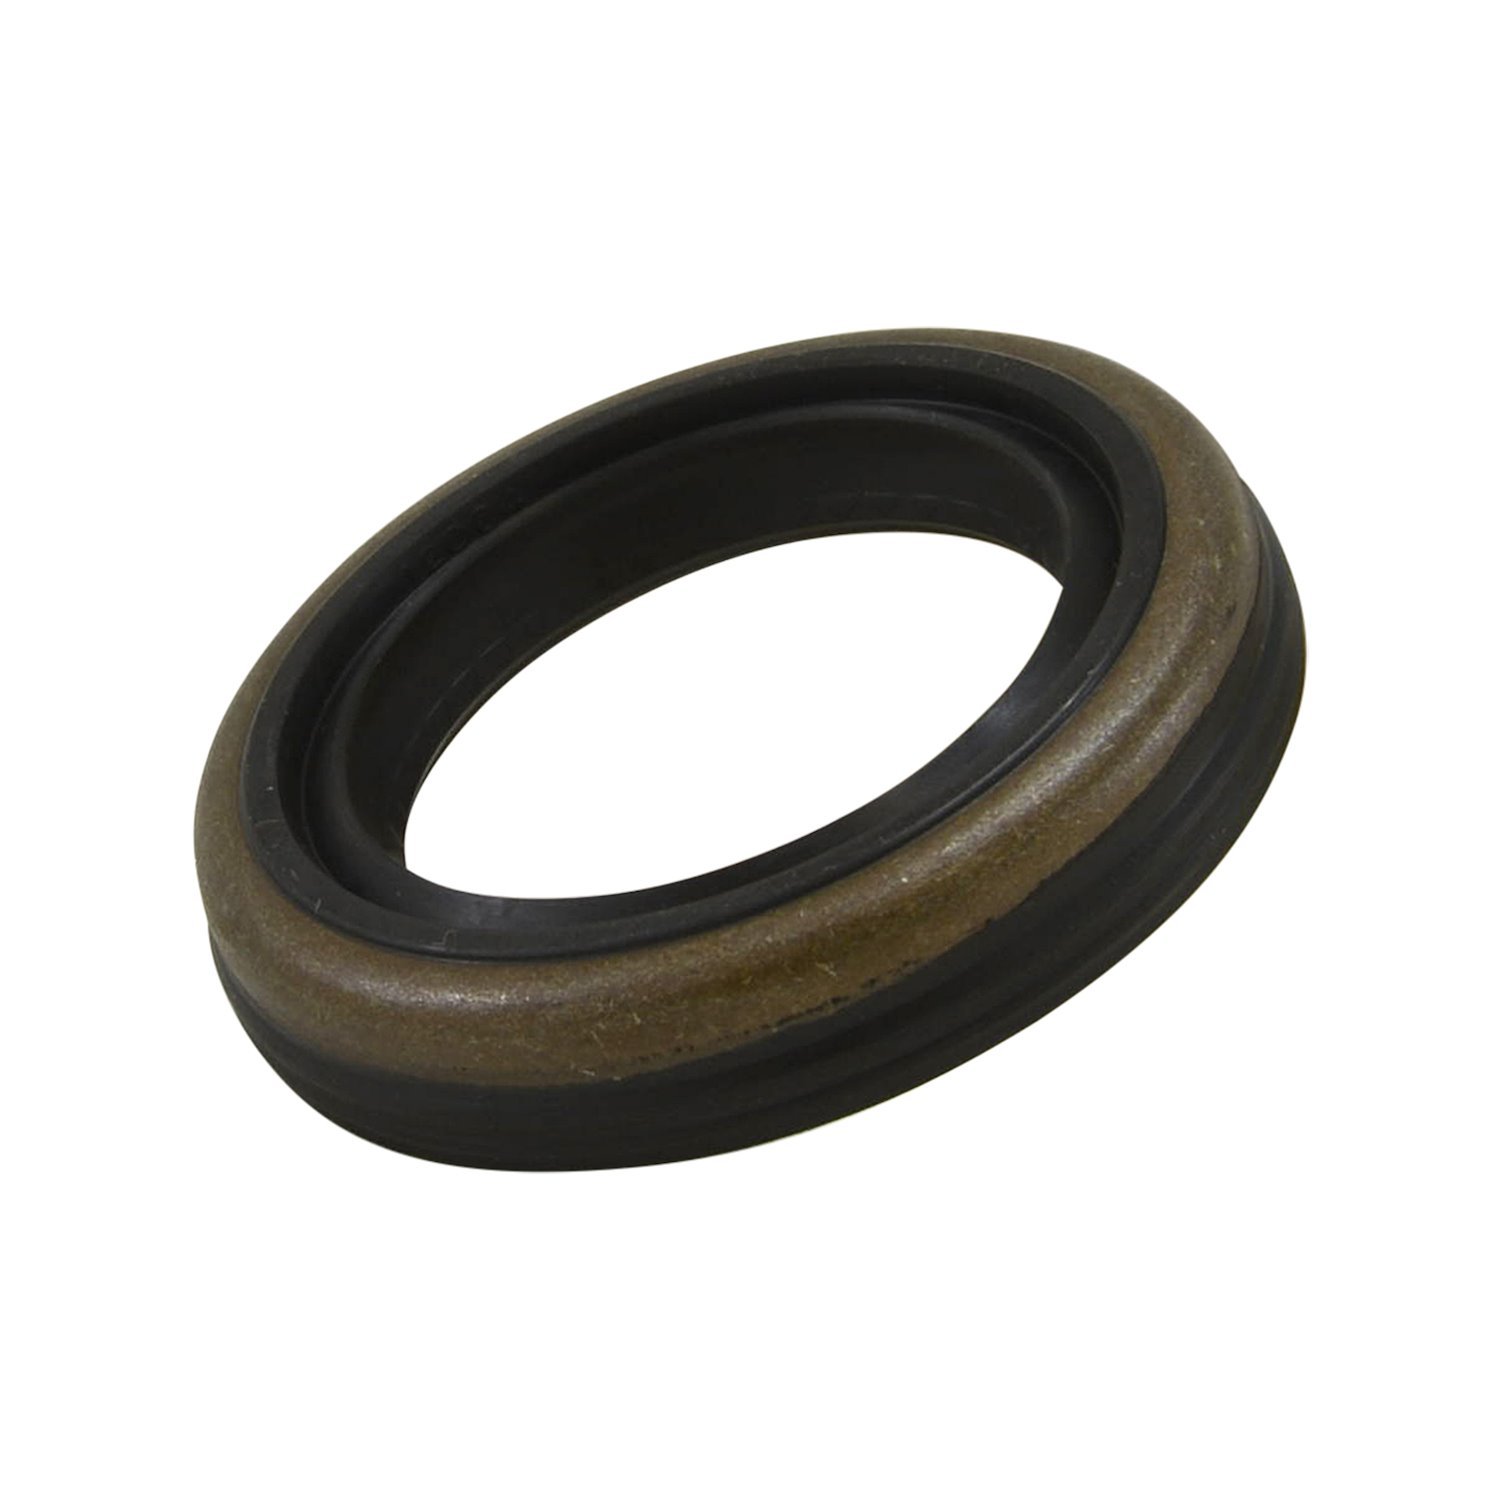 Yukon Mighty Axle Seal Fits 8.200 in. Buick, Oldsmobile & Pontiac